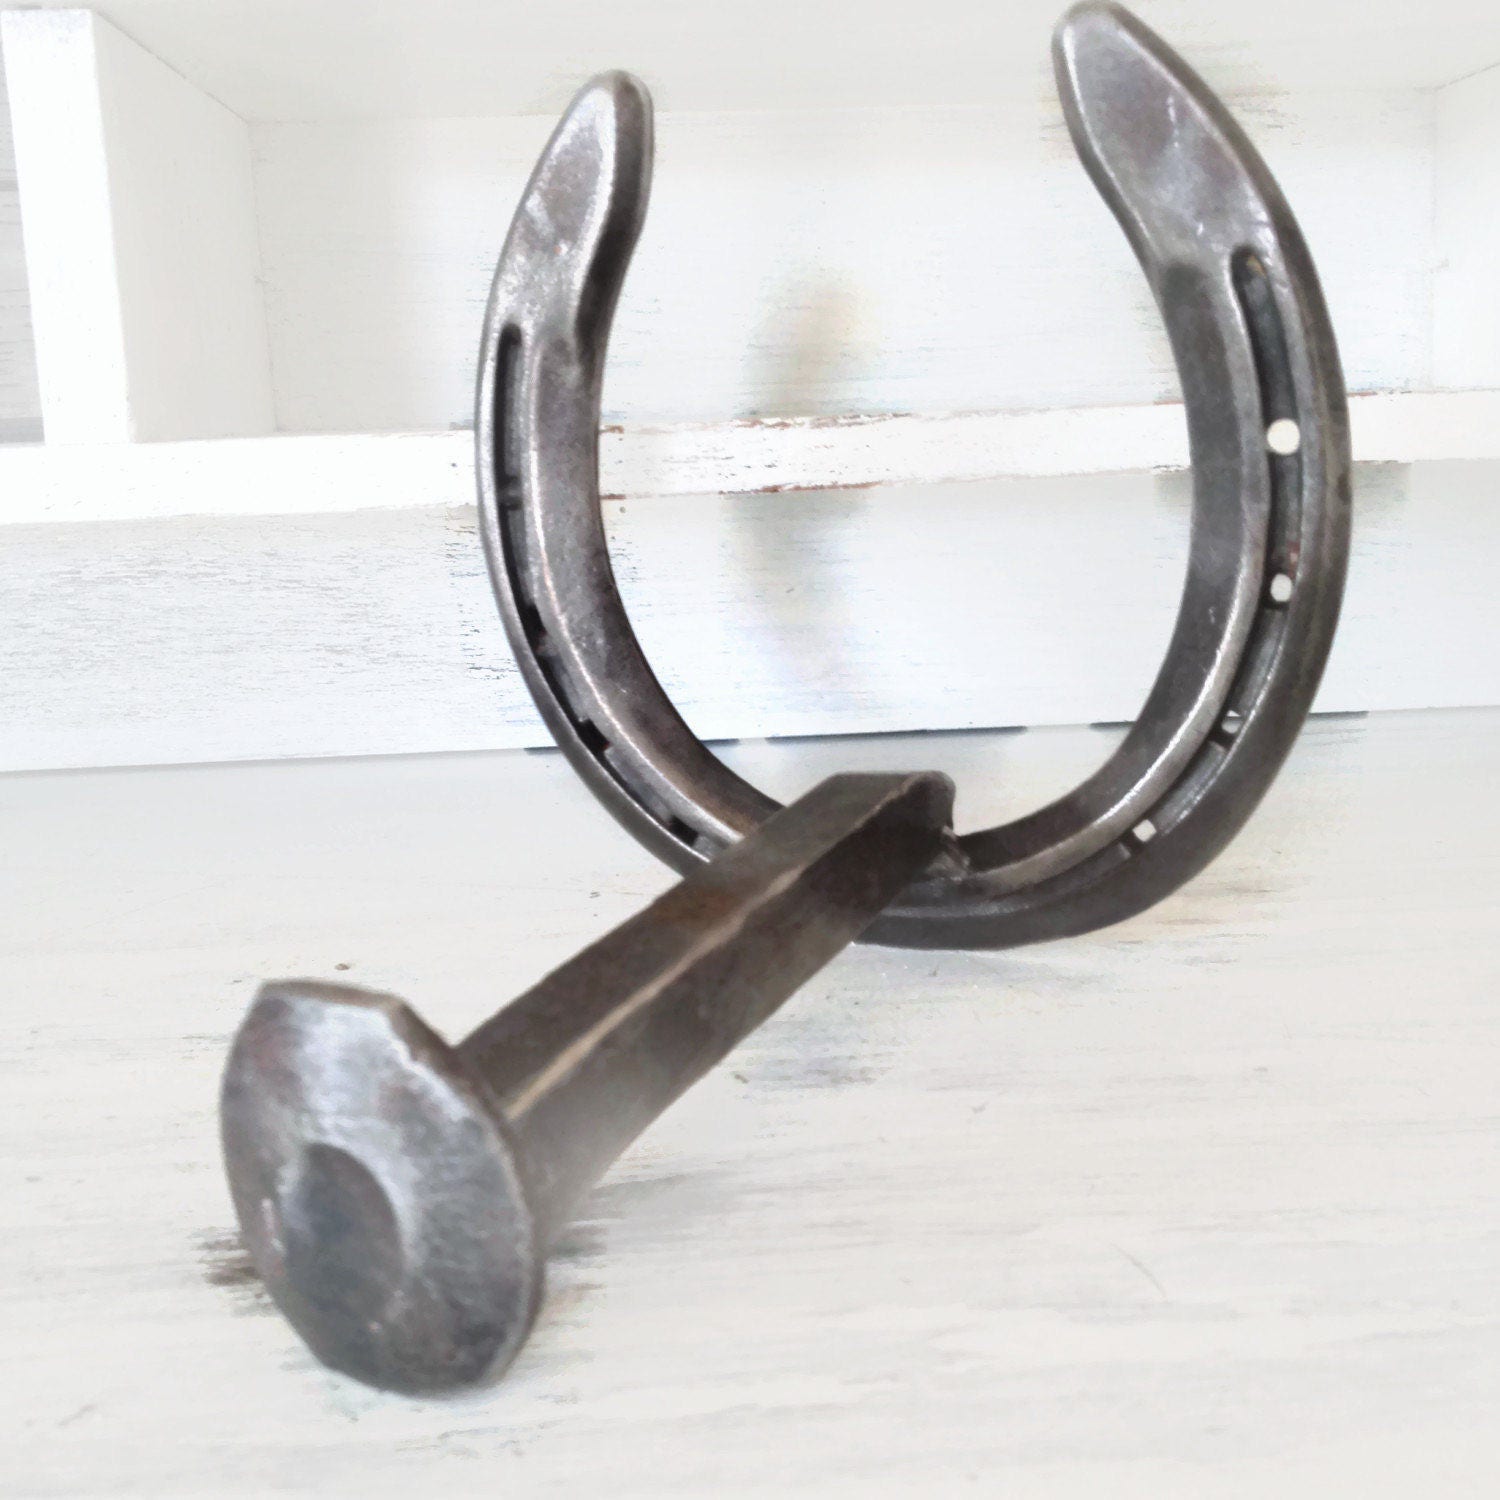 Horseshoe toilet paper holder, rancher gifts, western décor